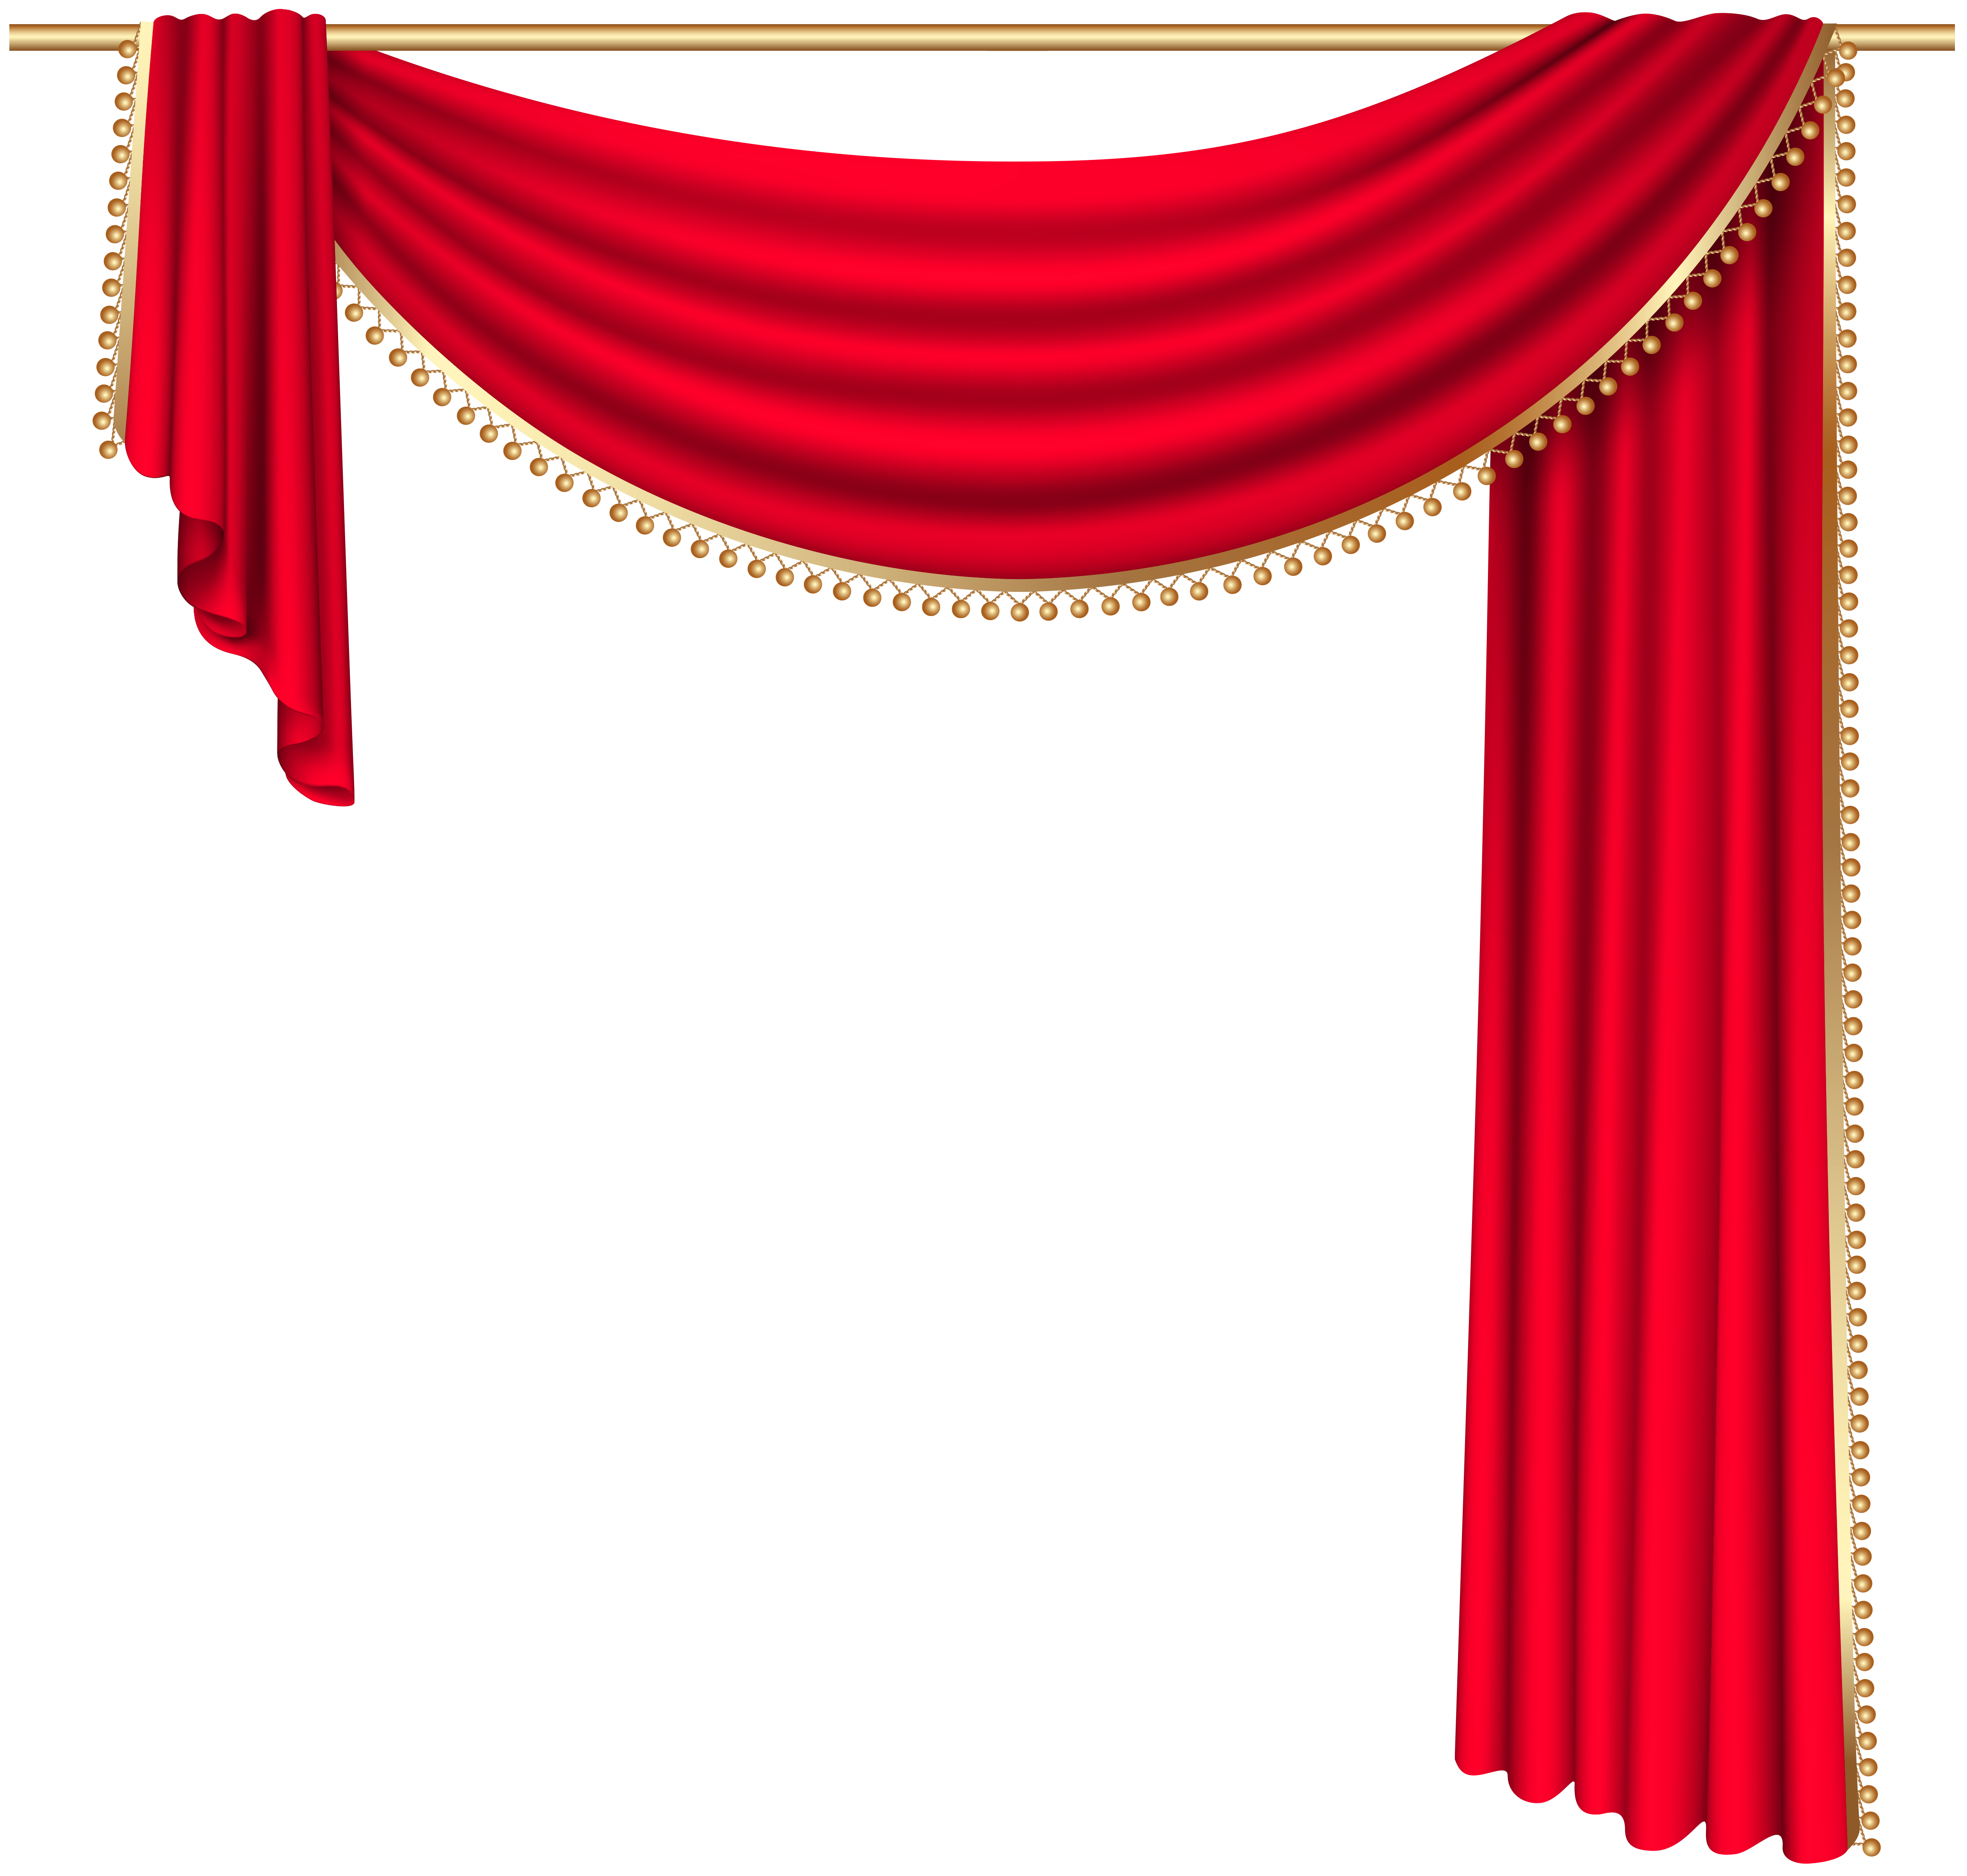 red curtain transparent png clip art image mukesh #17446